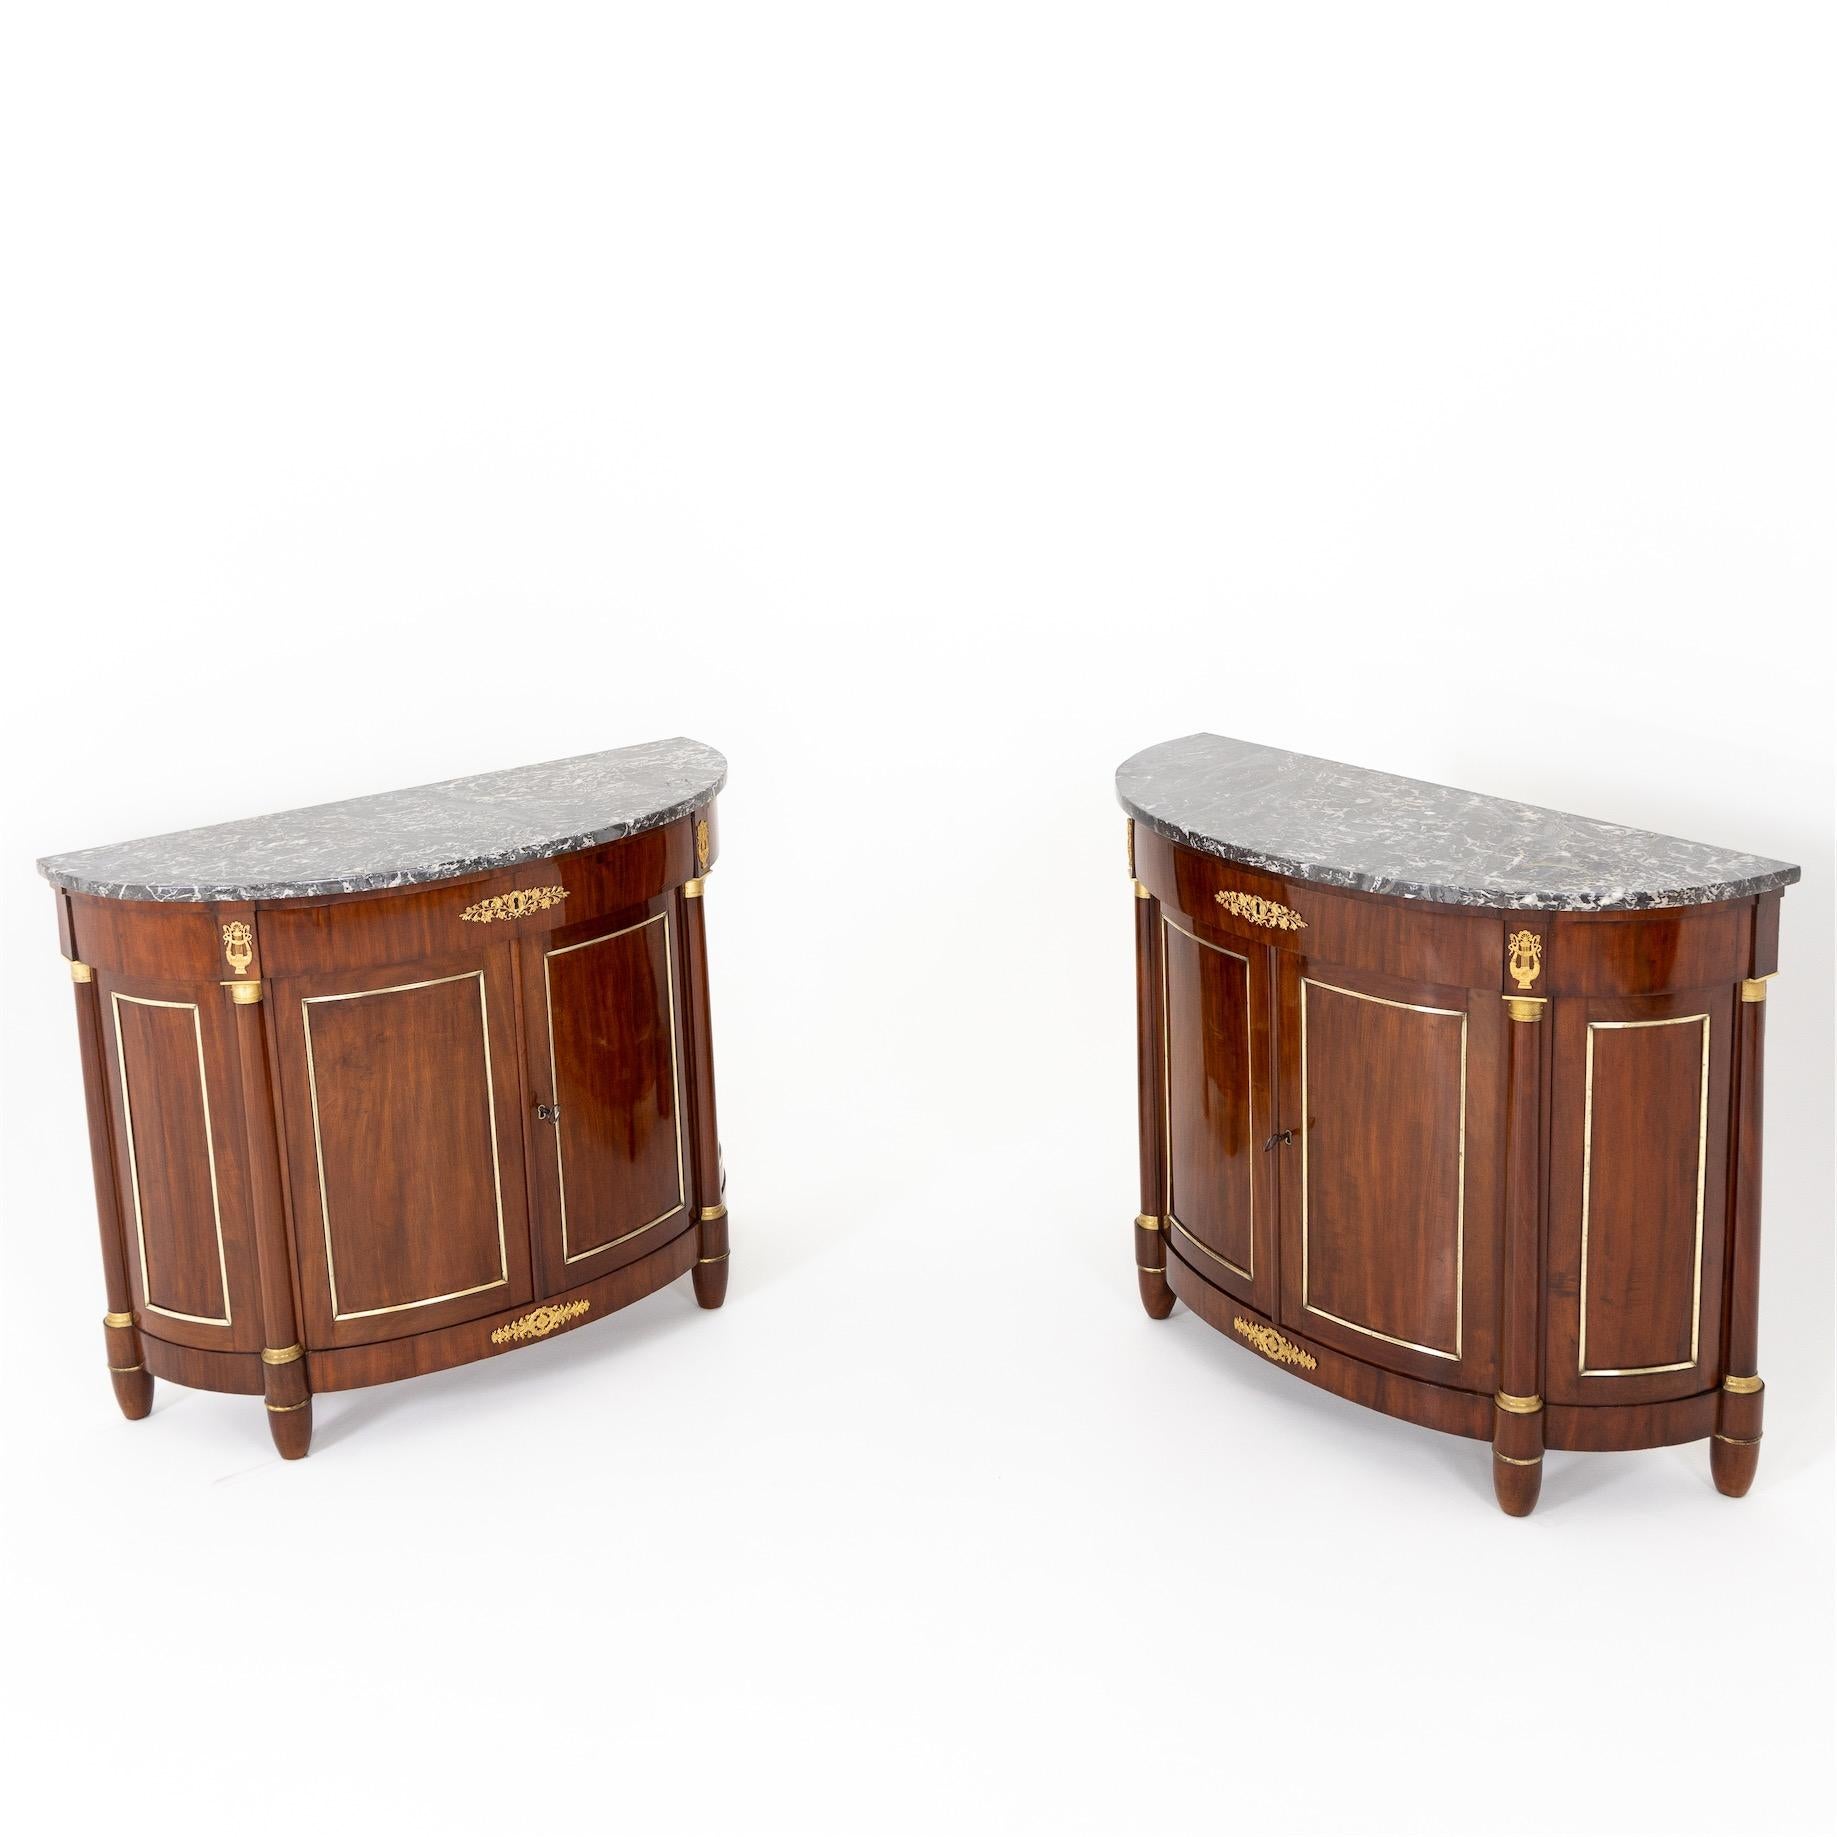 Early 19th Century Empire Demi Lune Sideboards, France, c. 1810